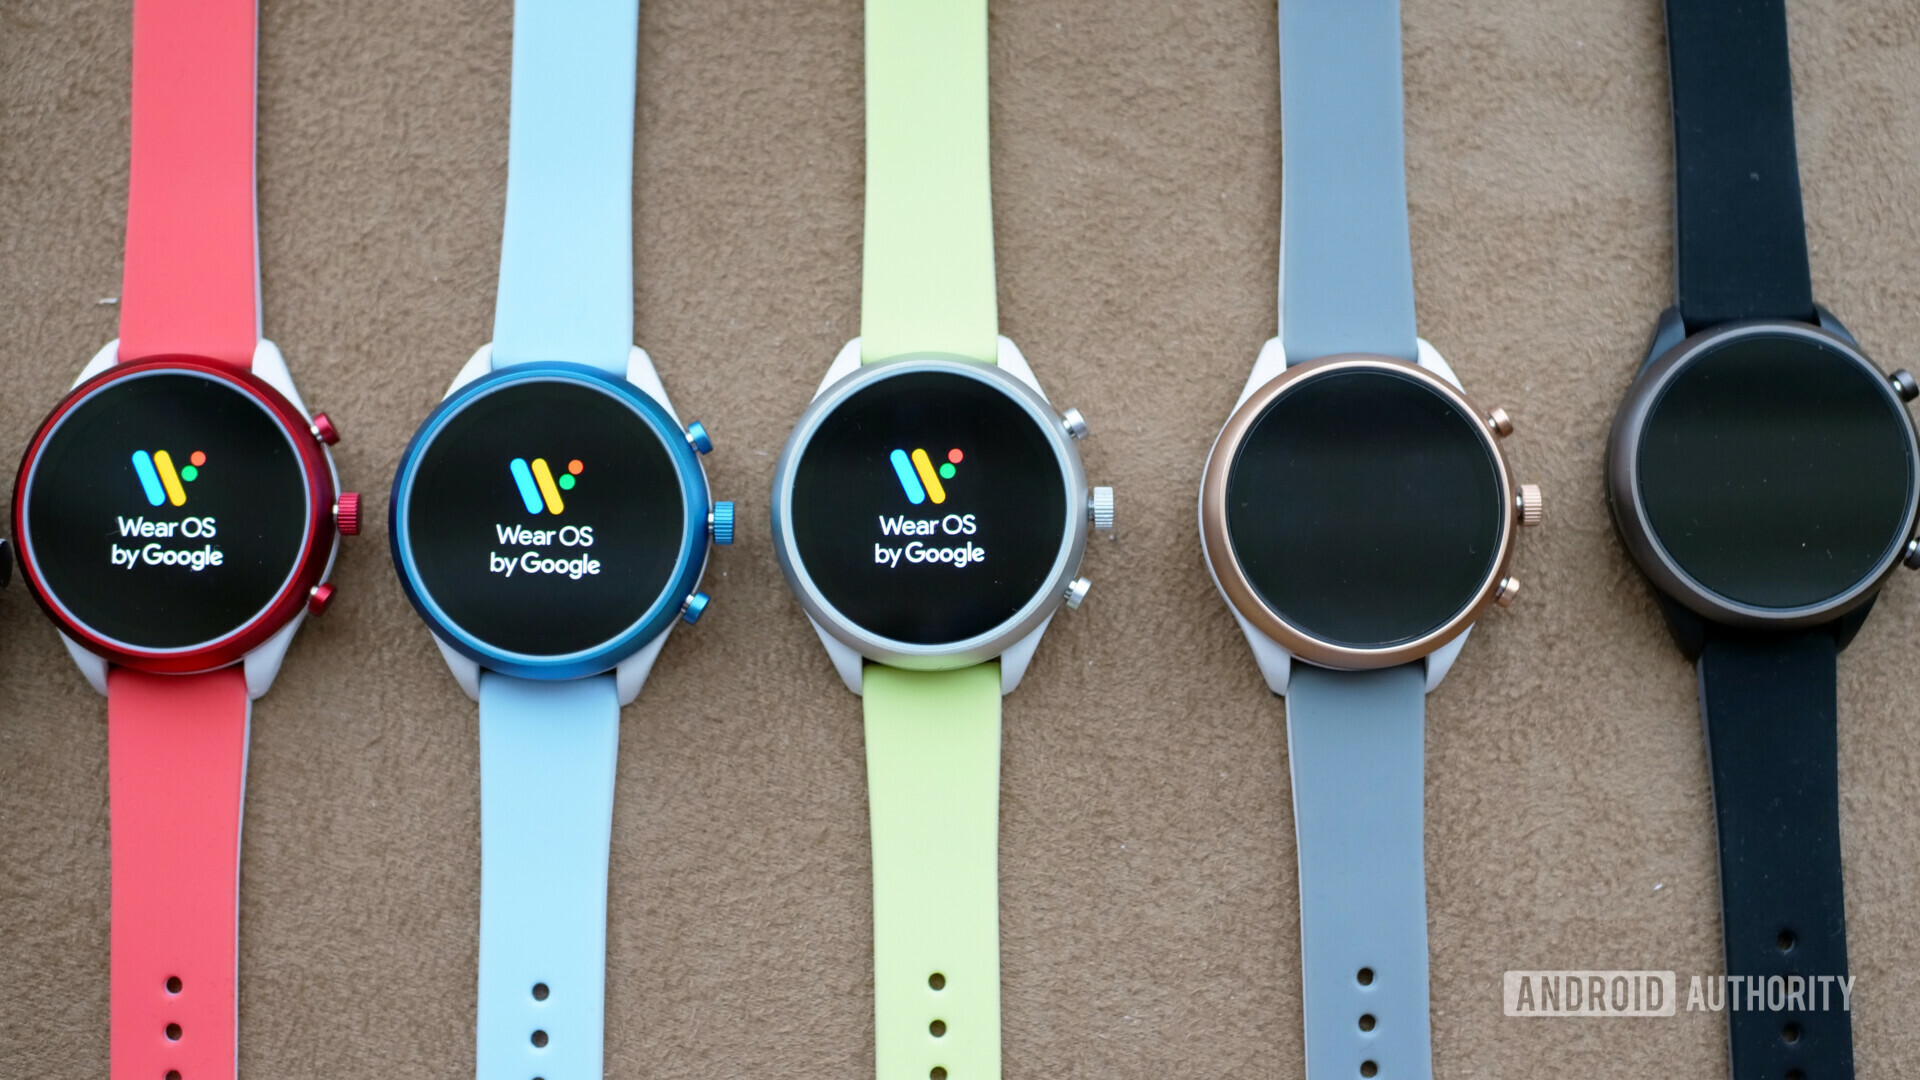 Wear OS logo on smartwatches - why Wear OS should get OEM skins